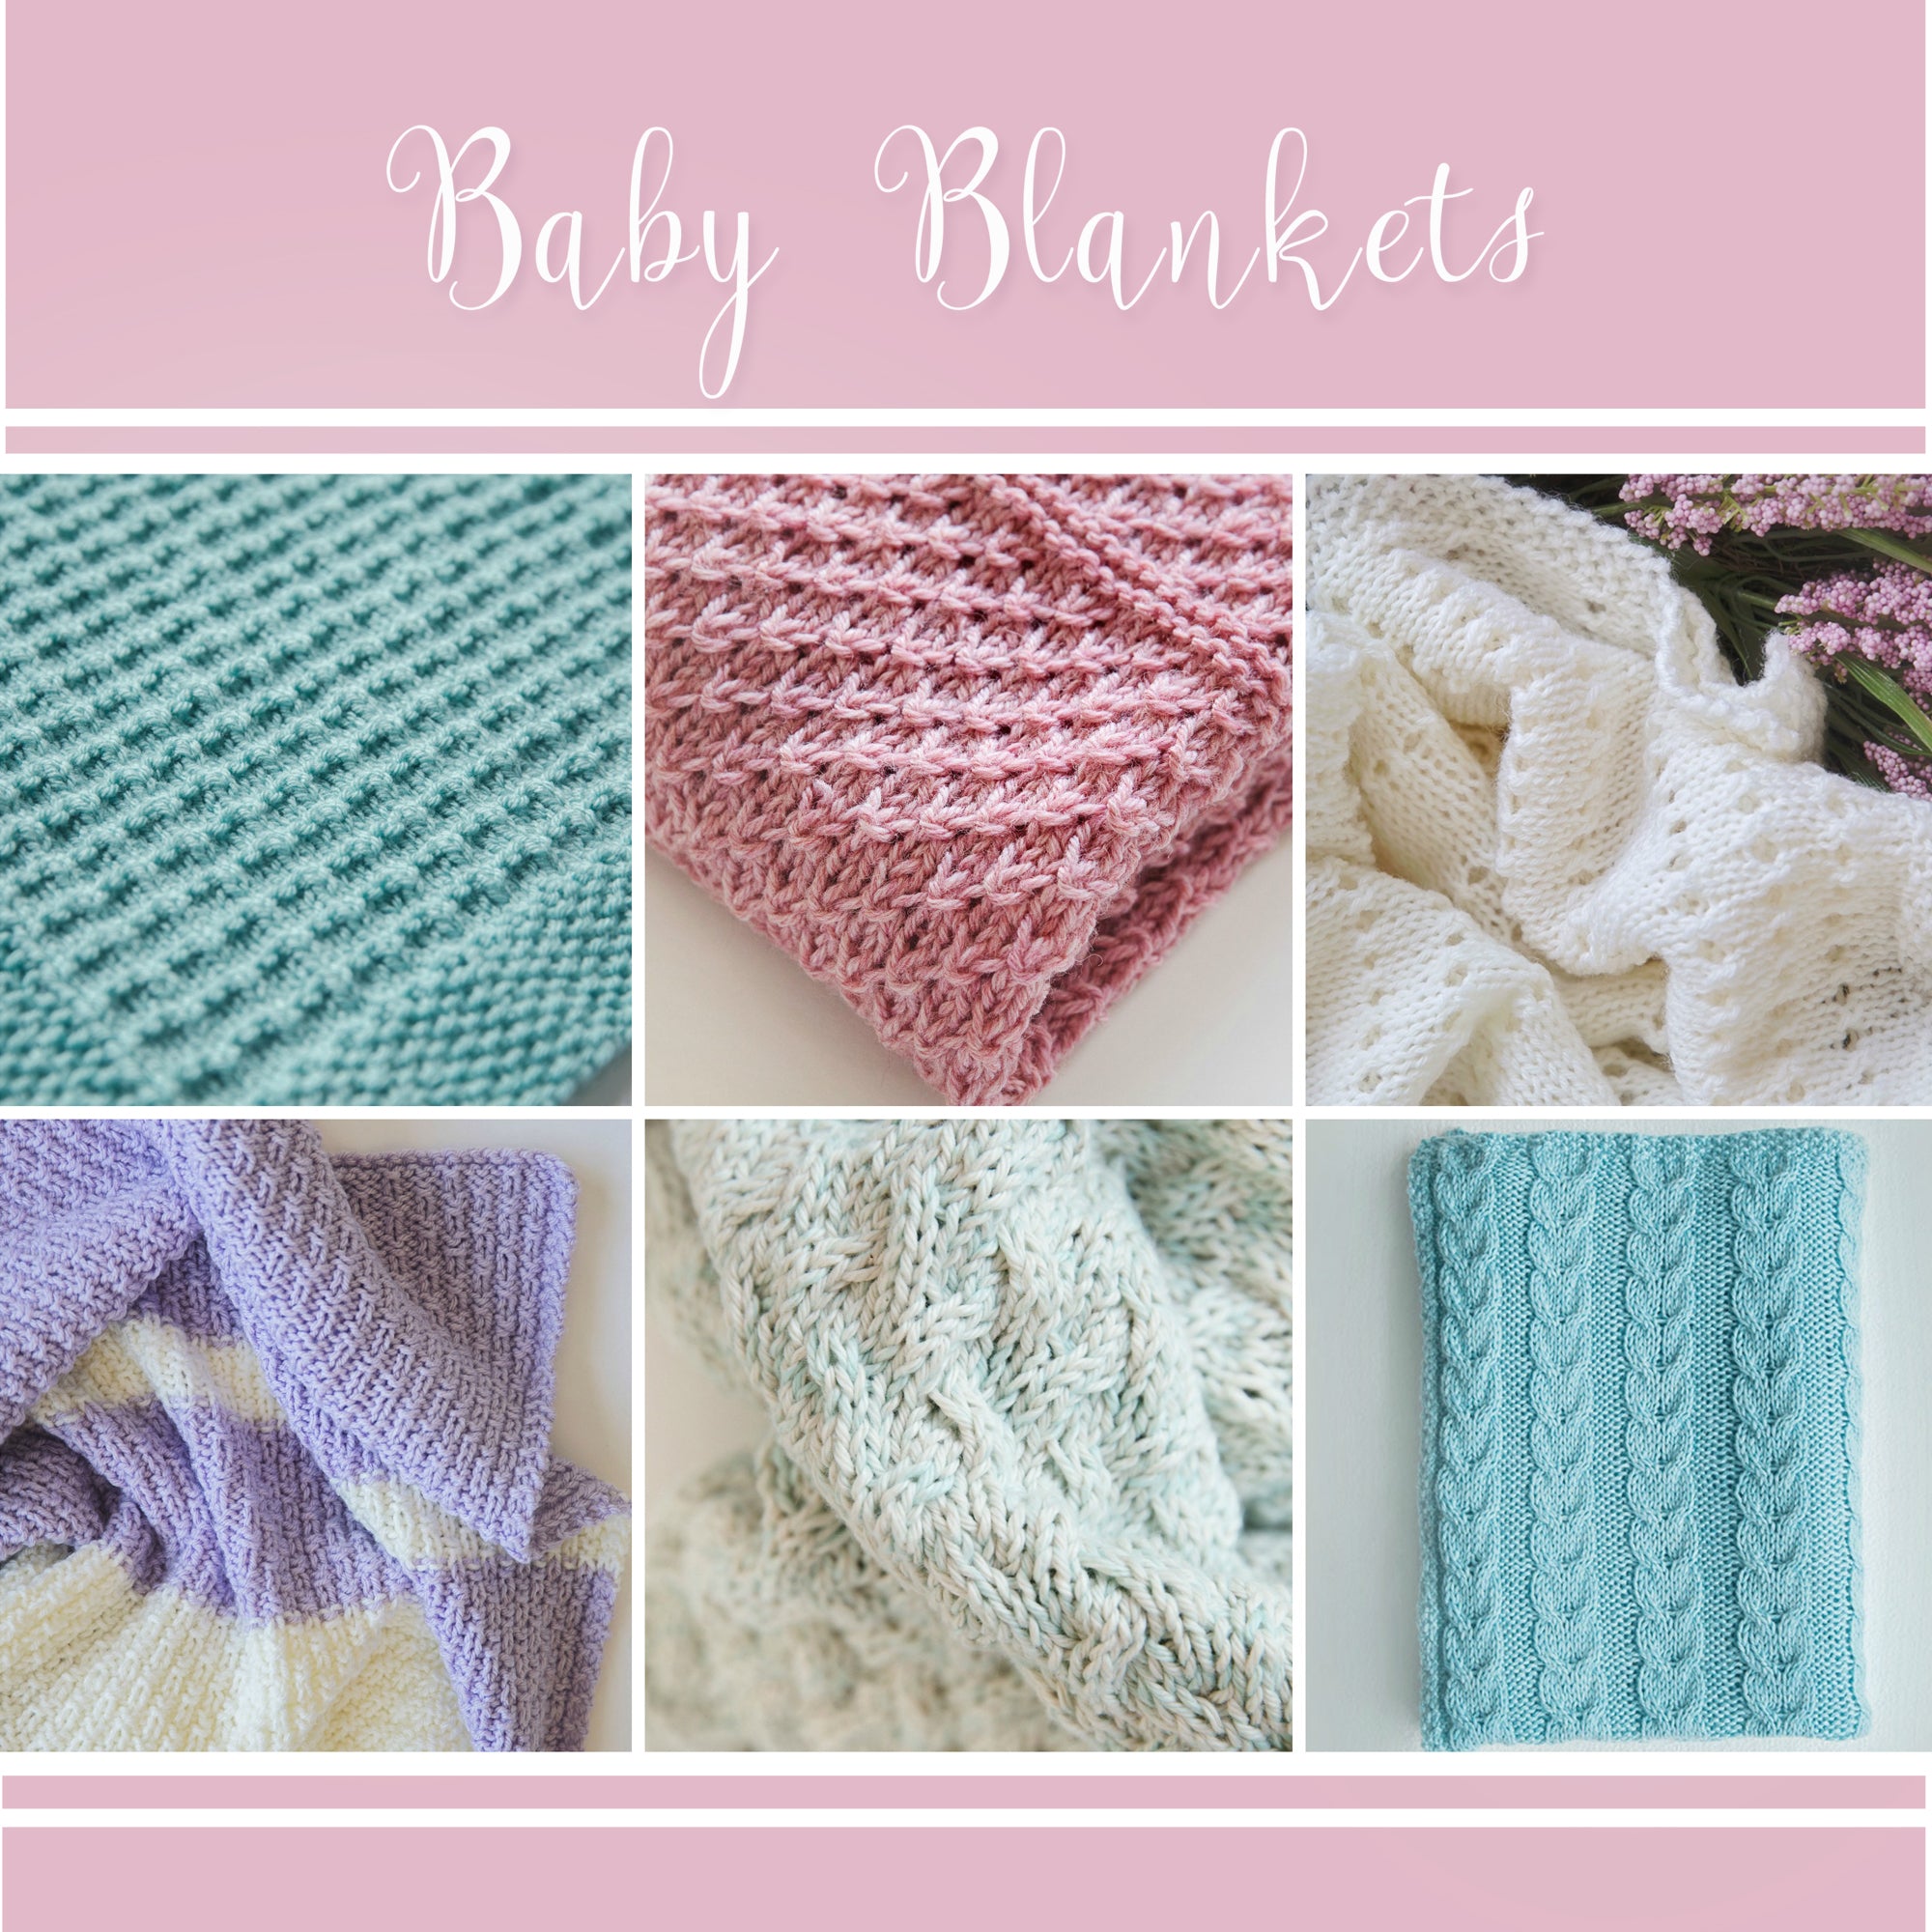 Part 1 - Knit Baby Blankets Collection